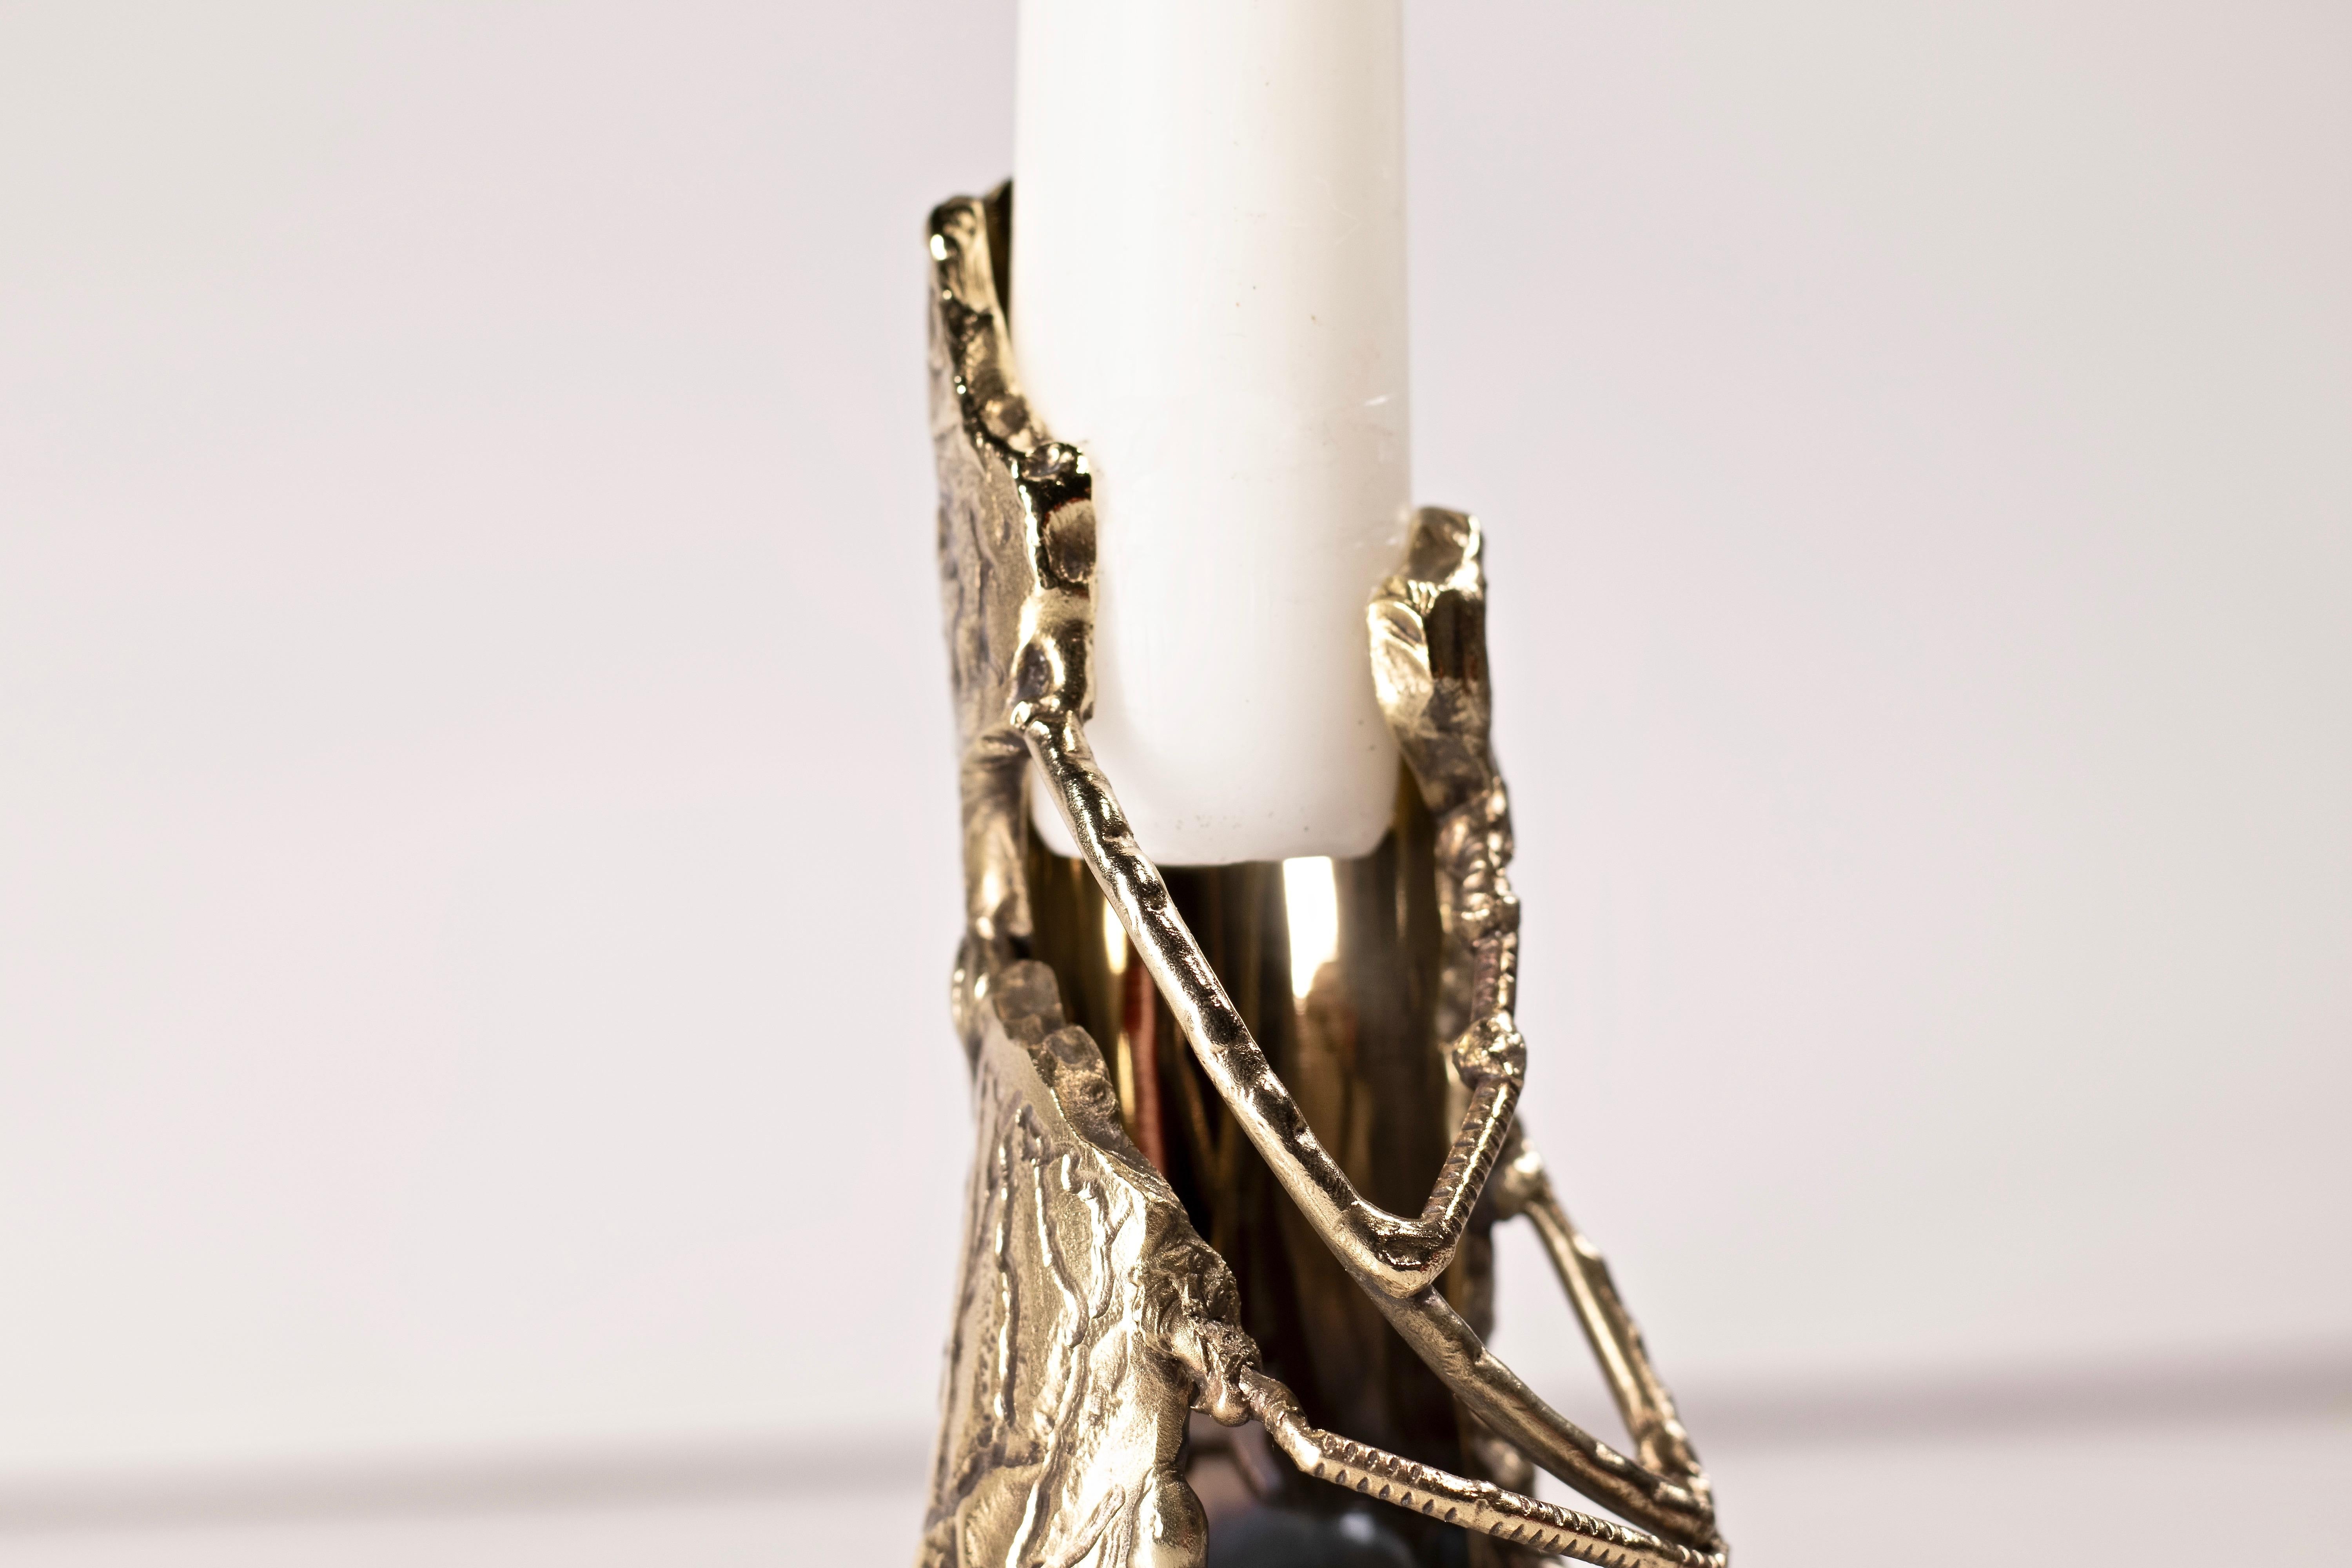 Ensemble of Brass Hand-Sculpted Candleholders by Samuel Costantini 1